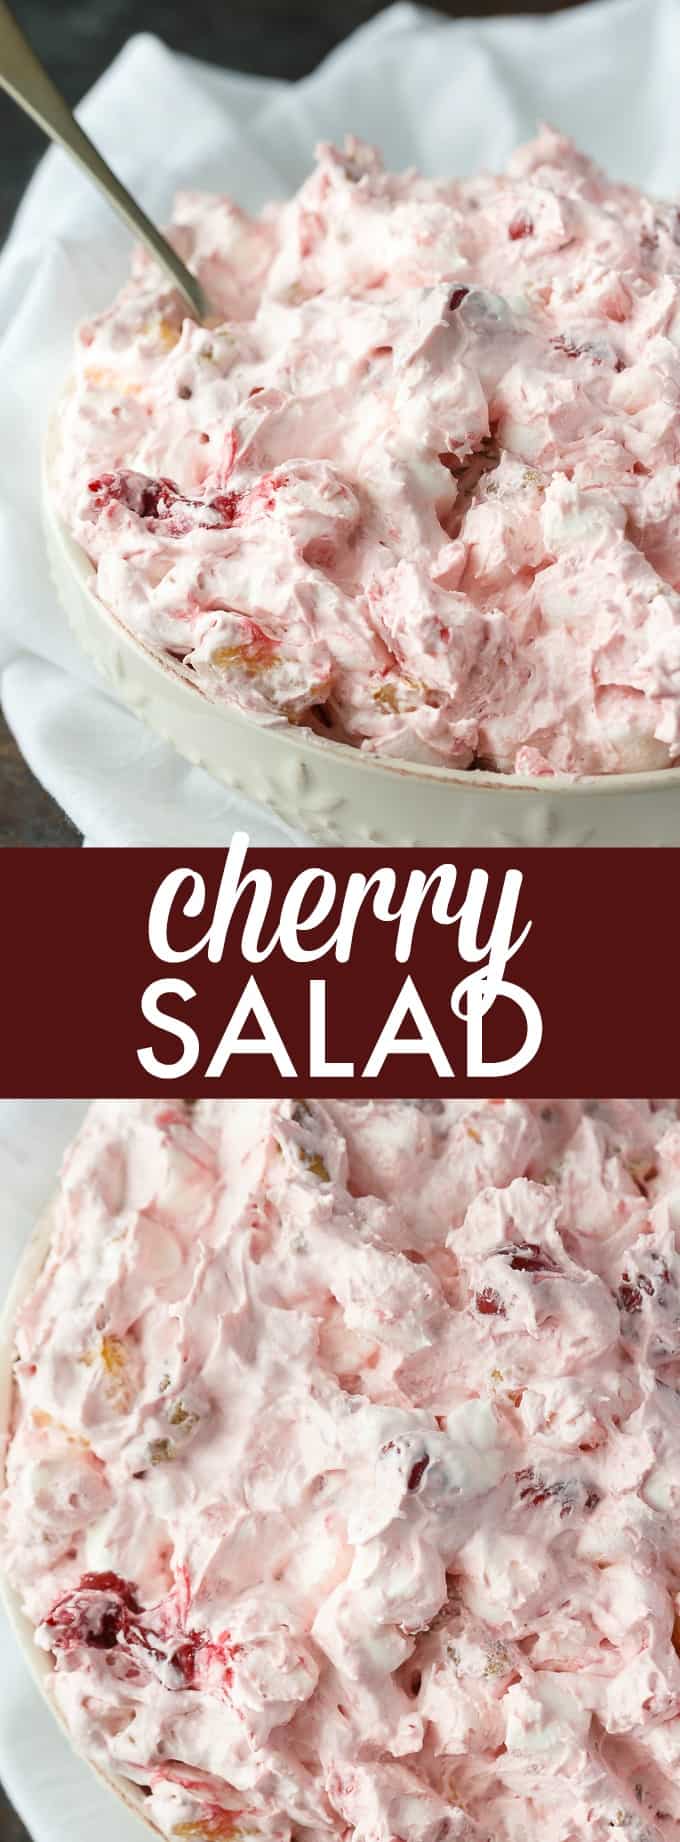 Cherry Salad - Super simple dessert with only six ingredients that you can whip up in a matter of minutes. Perfect for potlucks and parties!